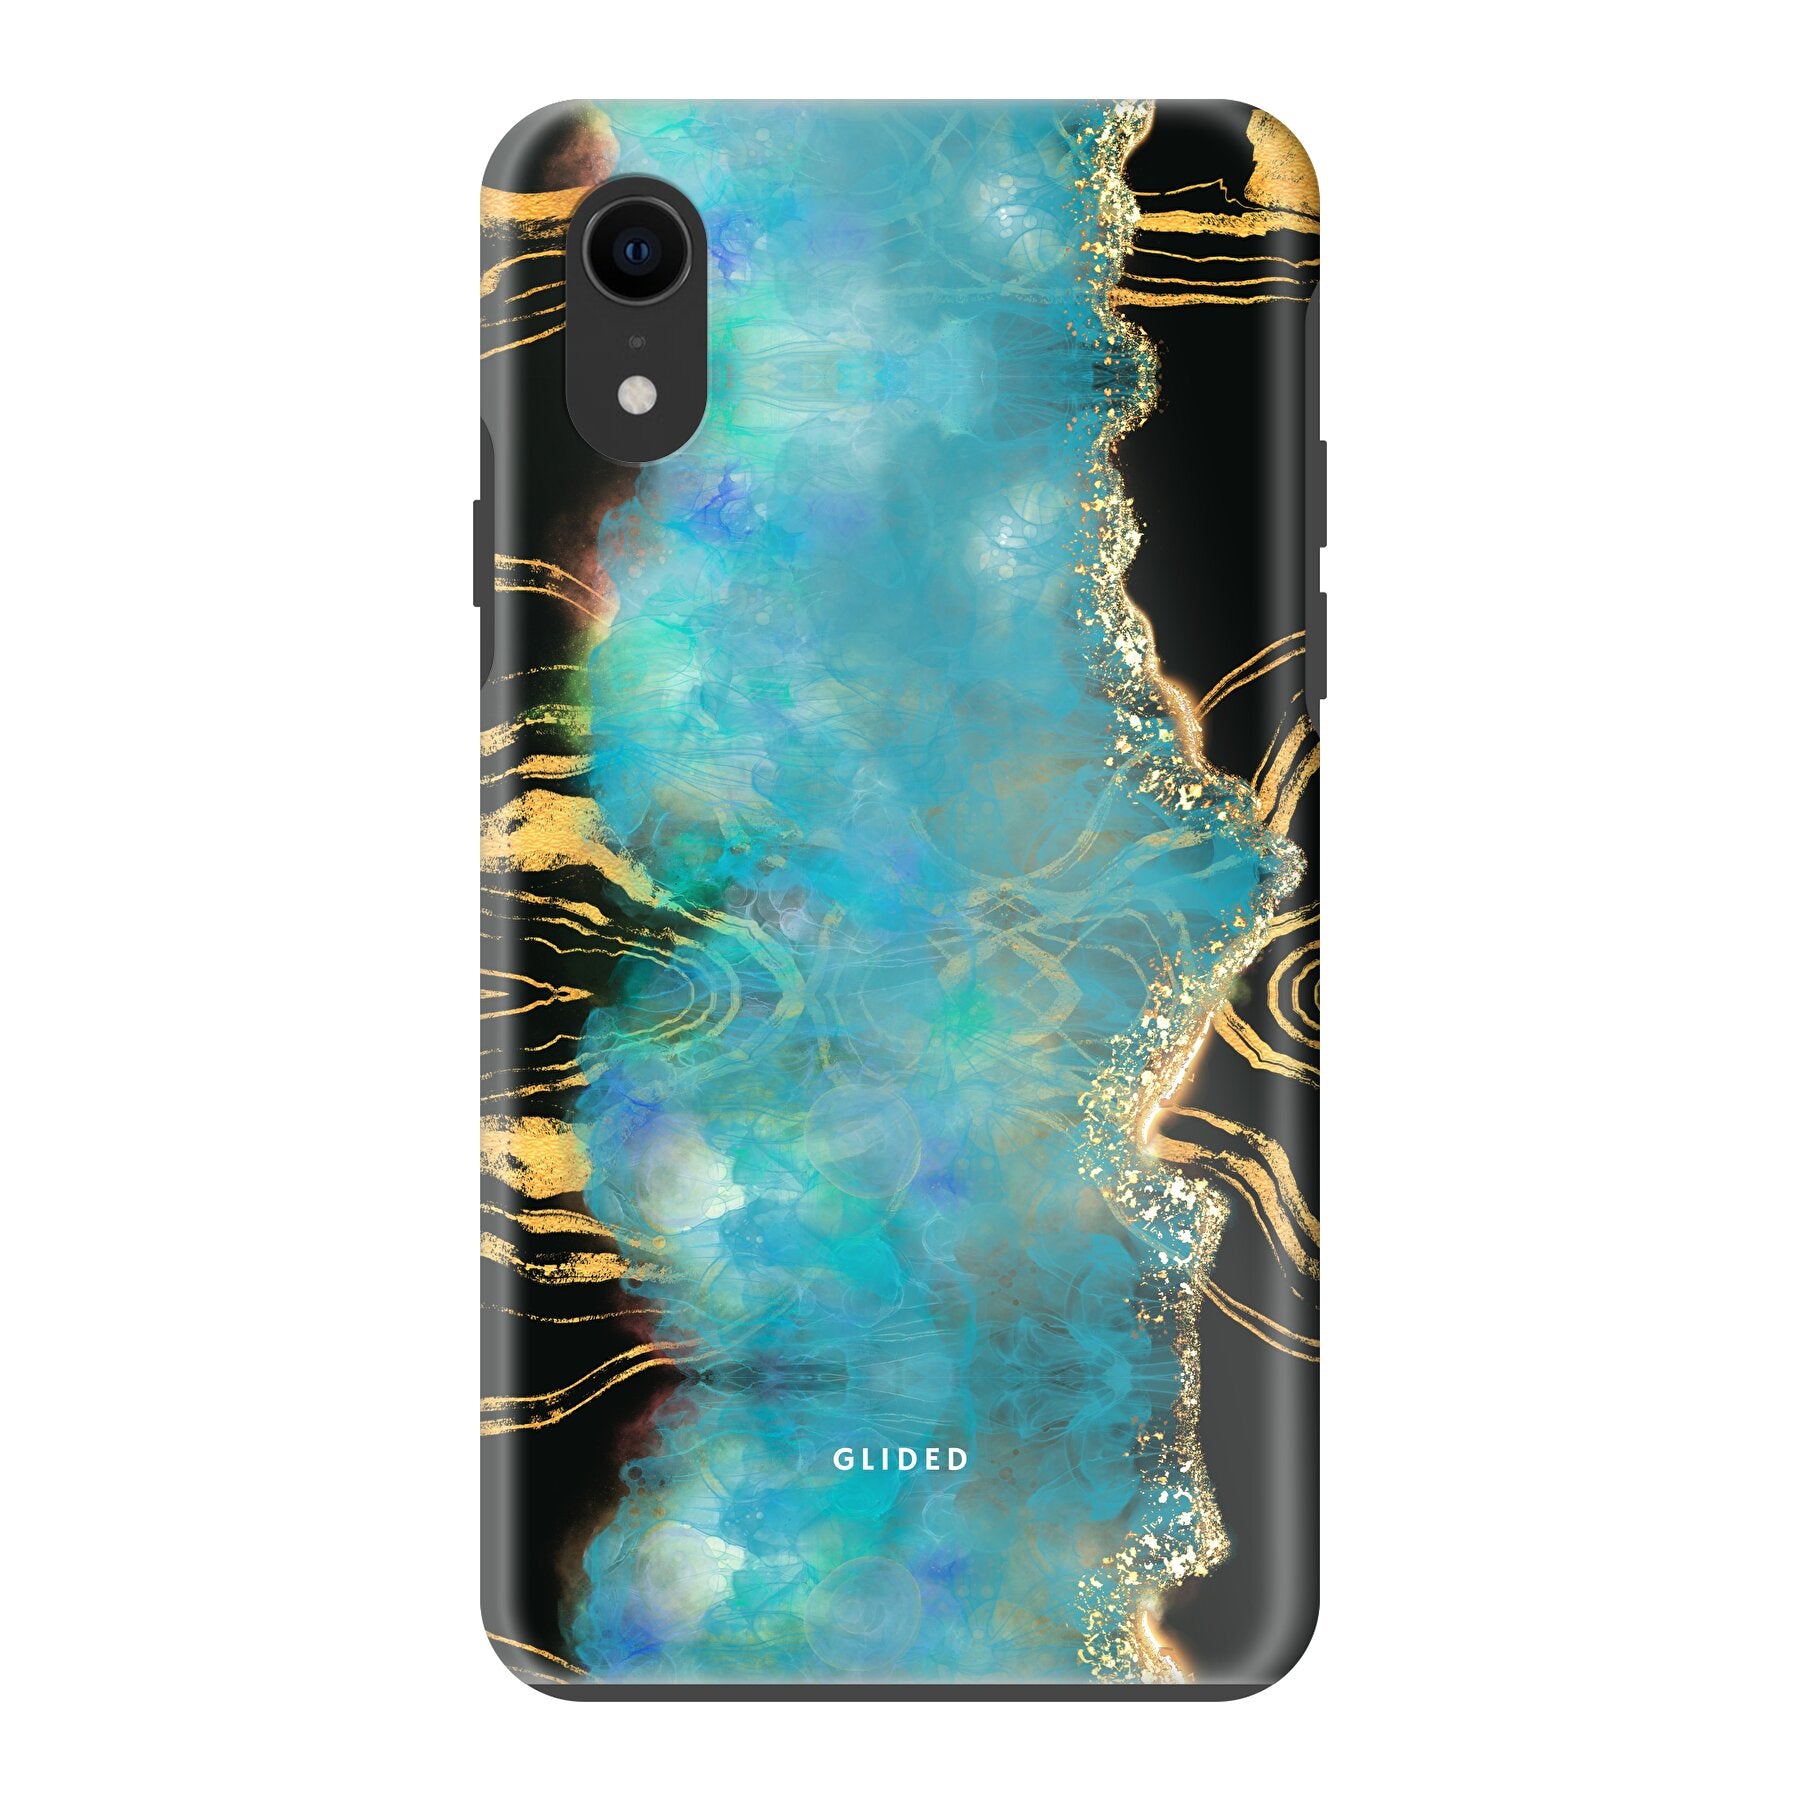 Waterly - iPhone XR Handyhülle Tough case